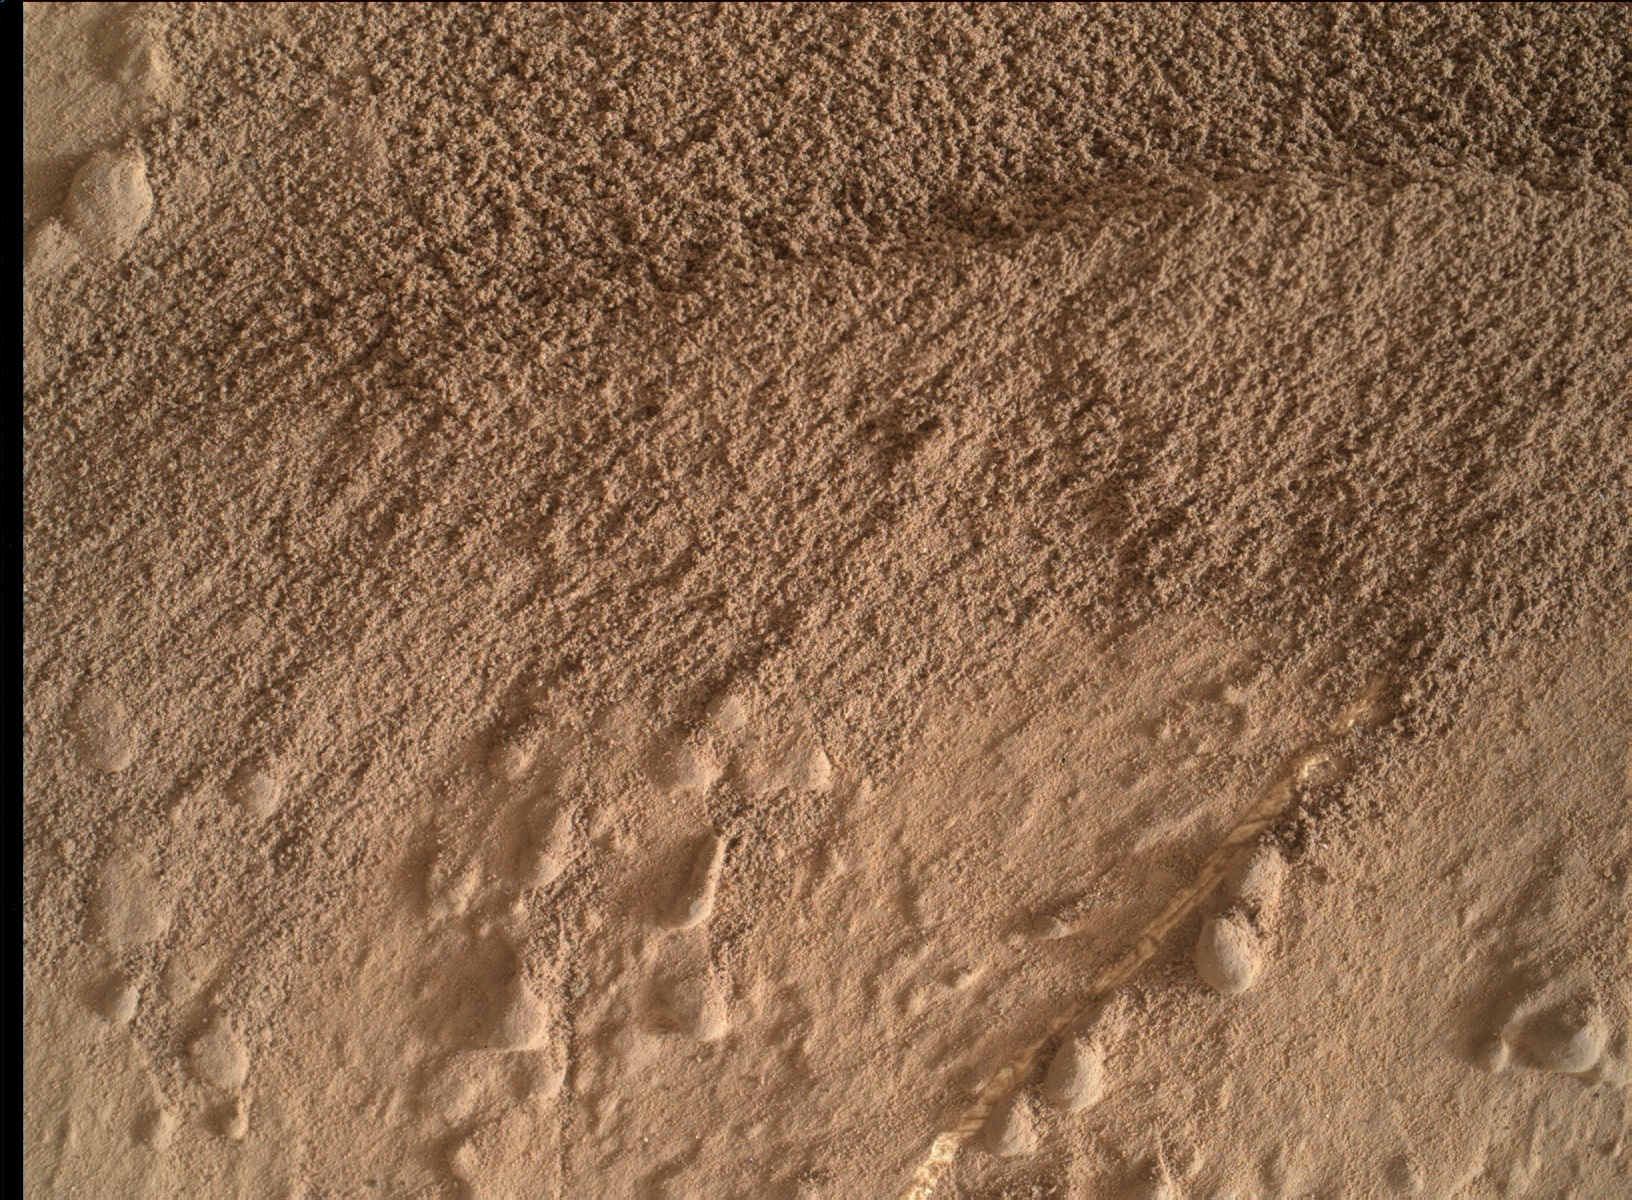 Nasa's Mars rover Curiosity acquired this image using its Mars Hand Lens Imager (MAHLI) on Sol 1493